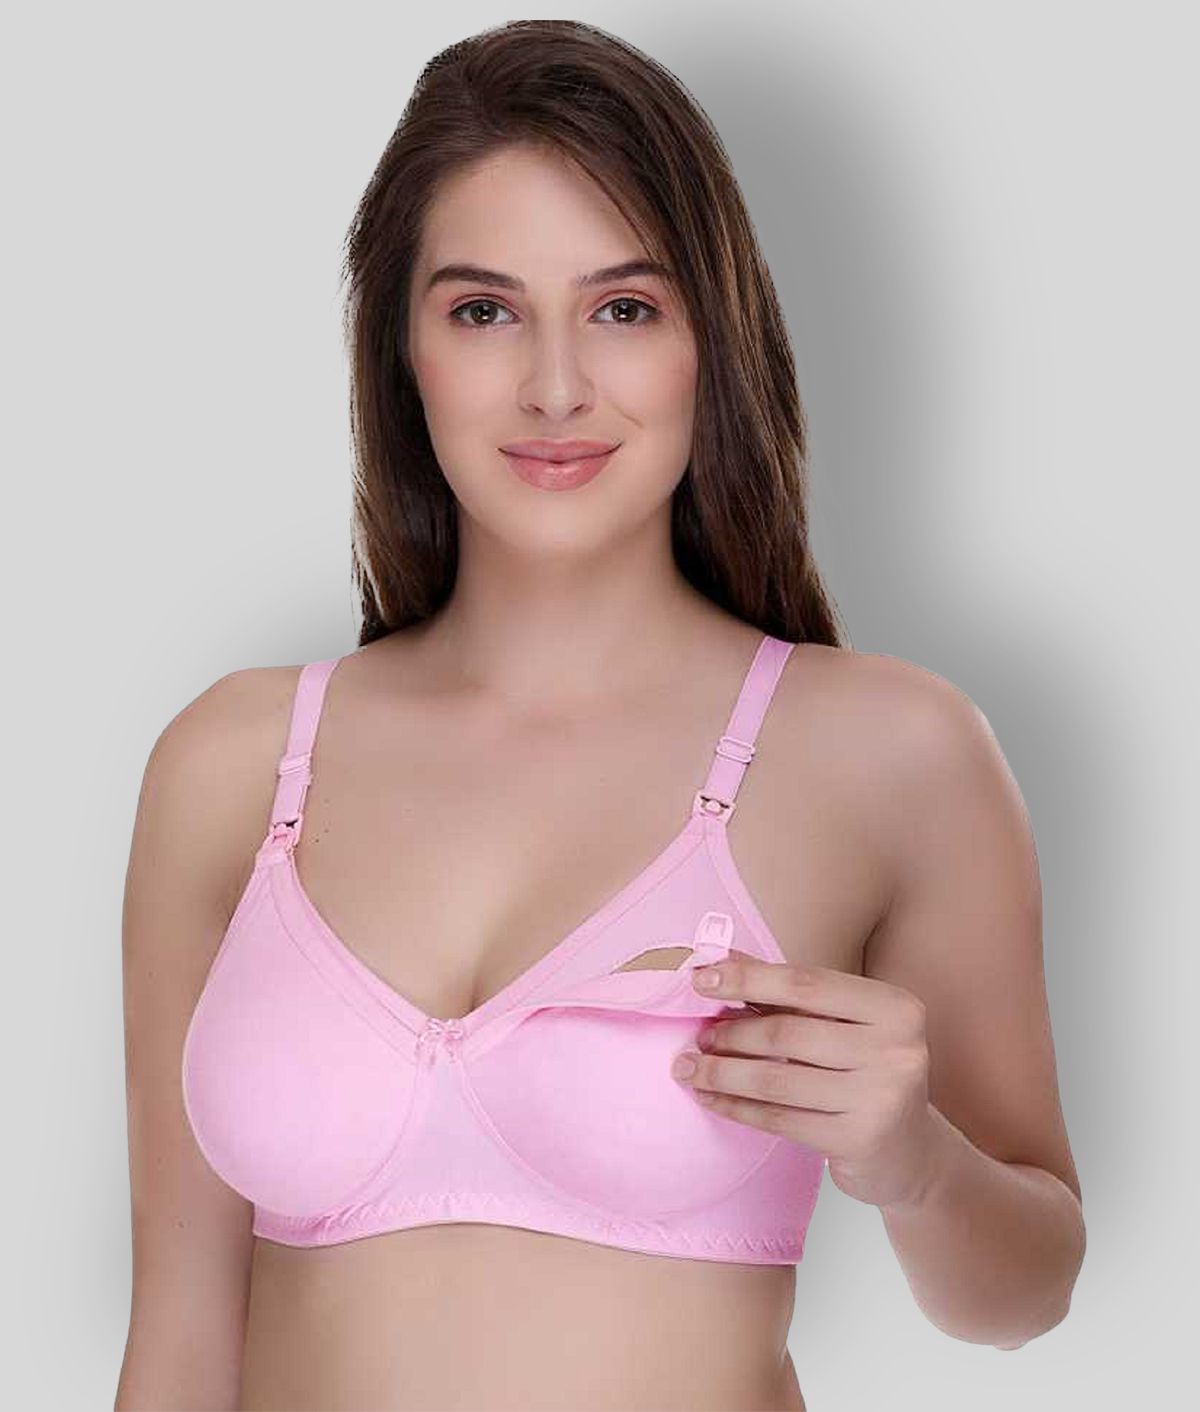 Desiprime - 100% Cotton Solid Pink Women's Maternity Bra - Pack of 1